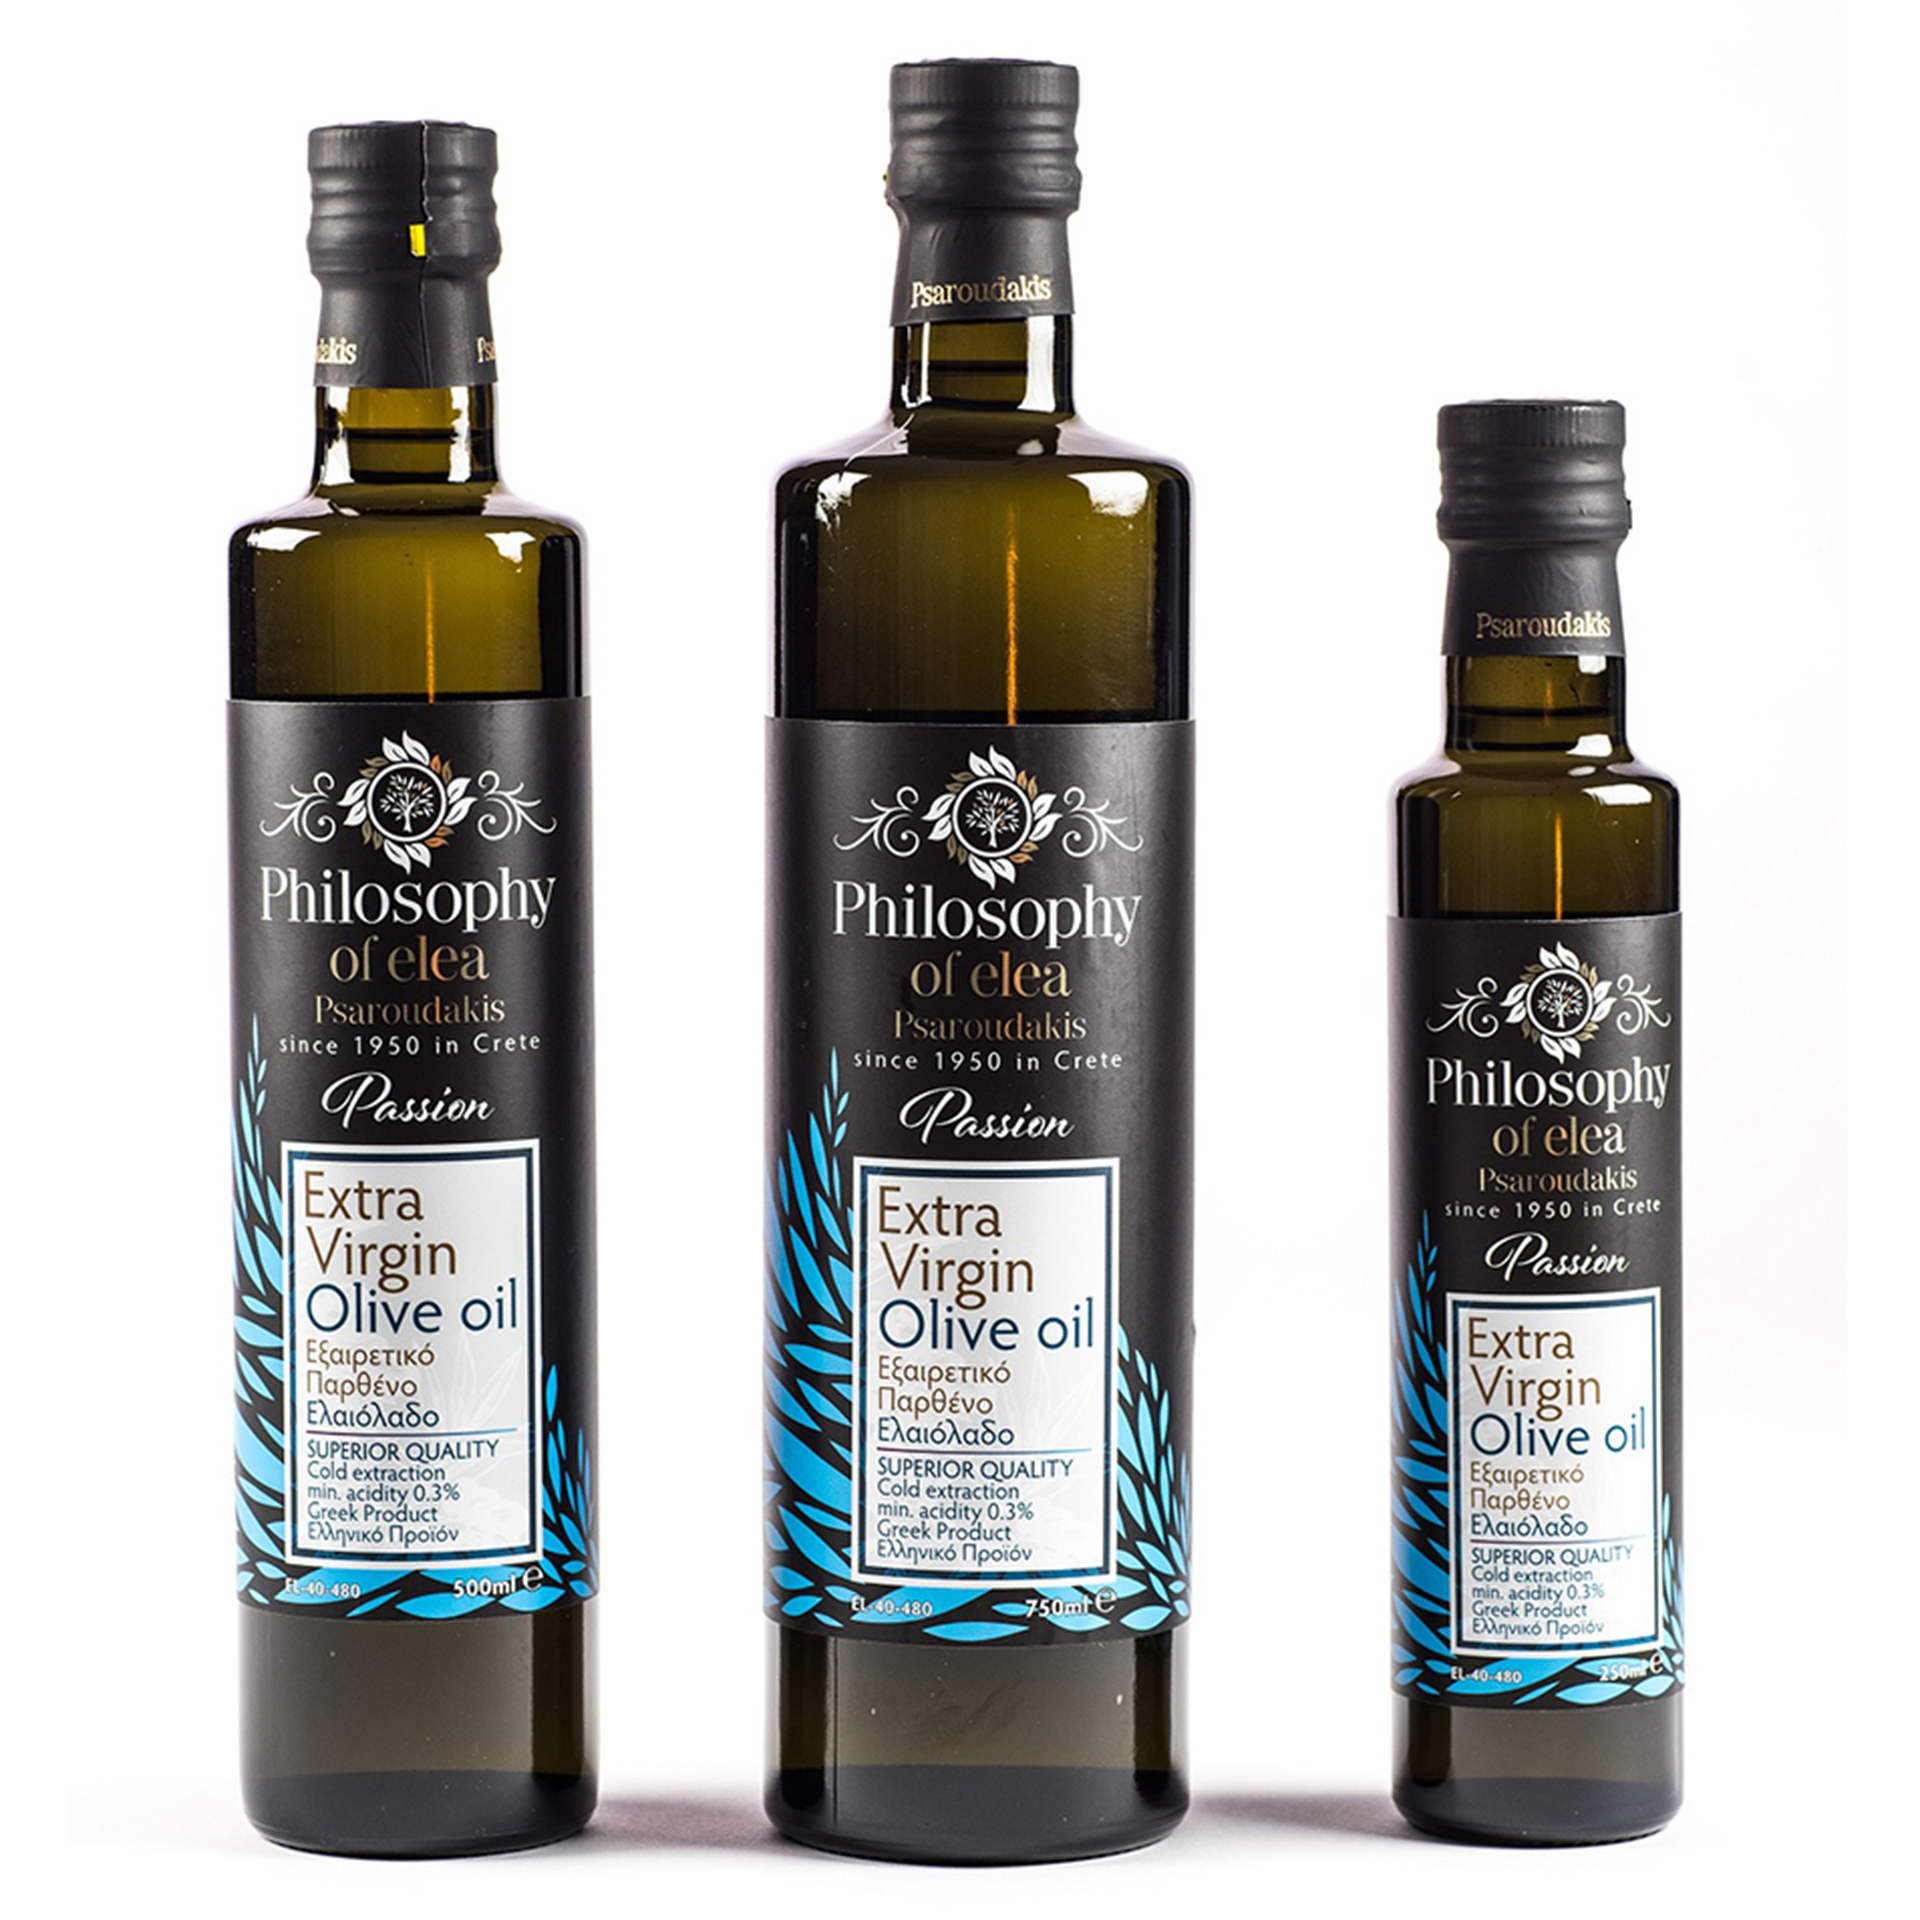 Passion - extra virgin olive oil